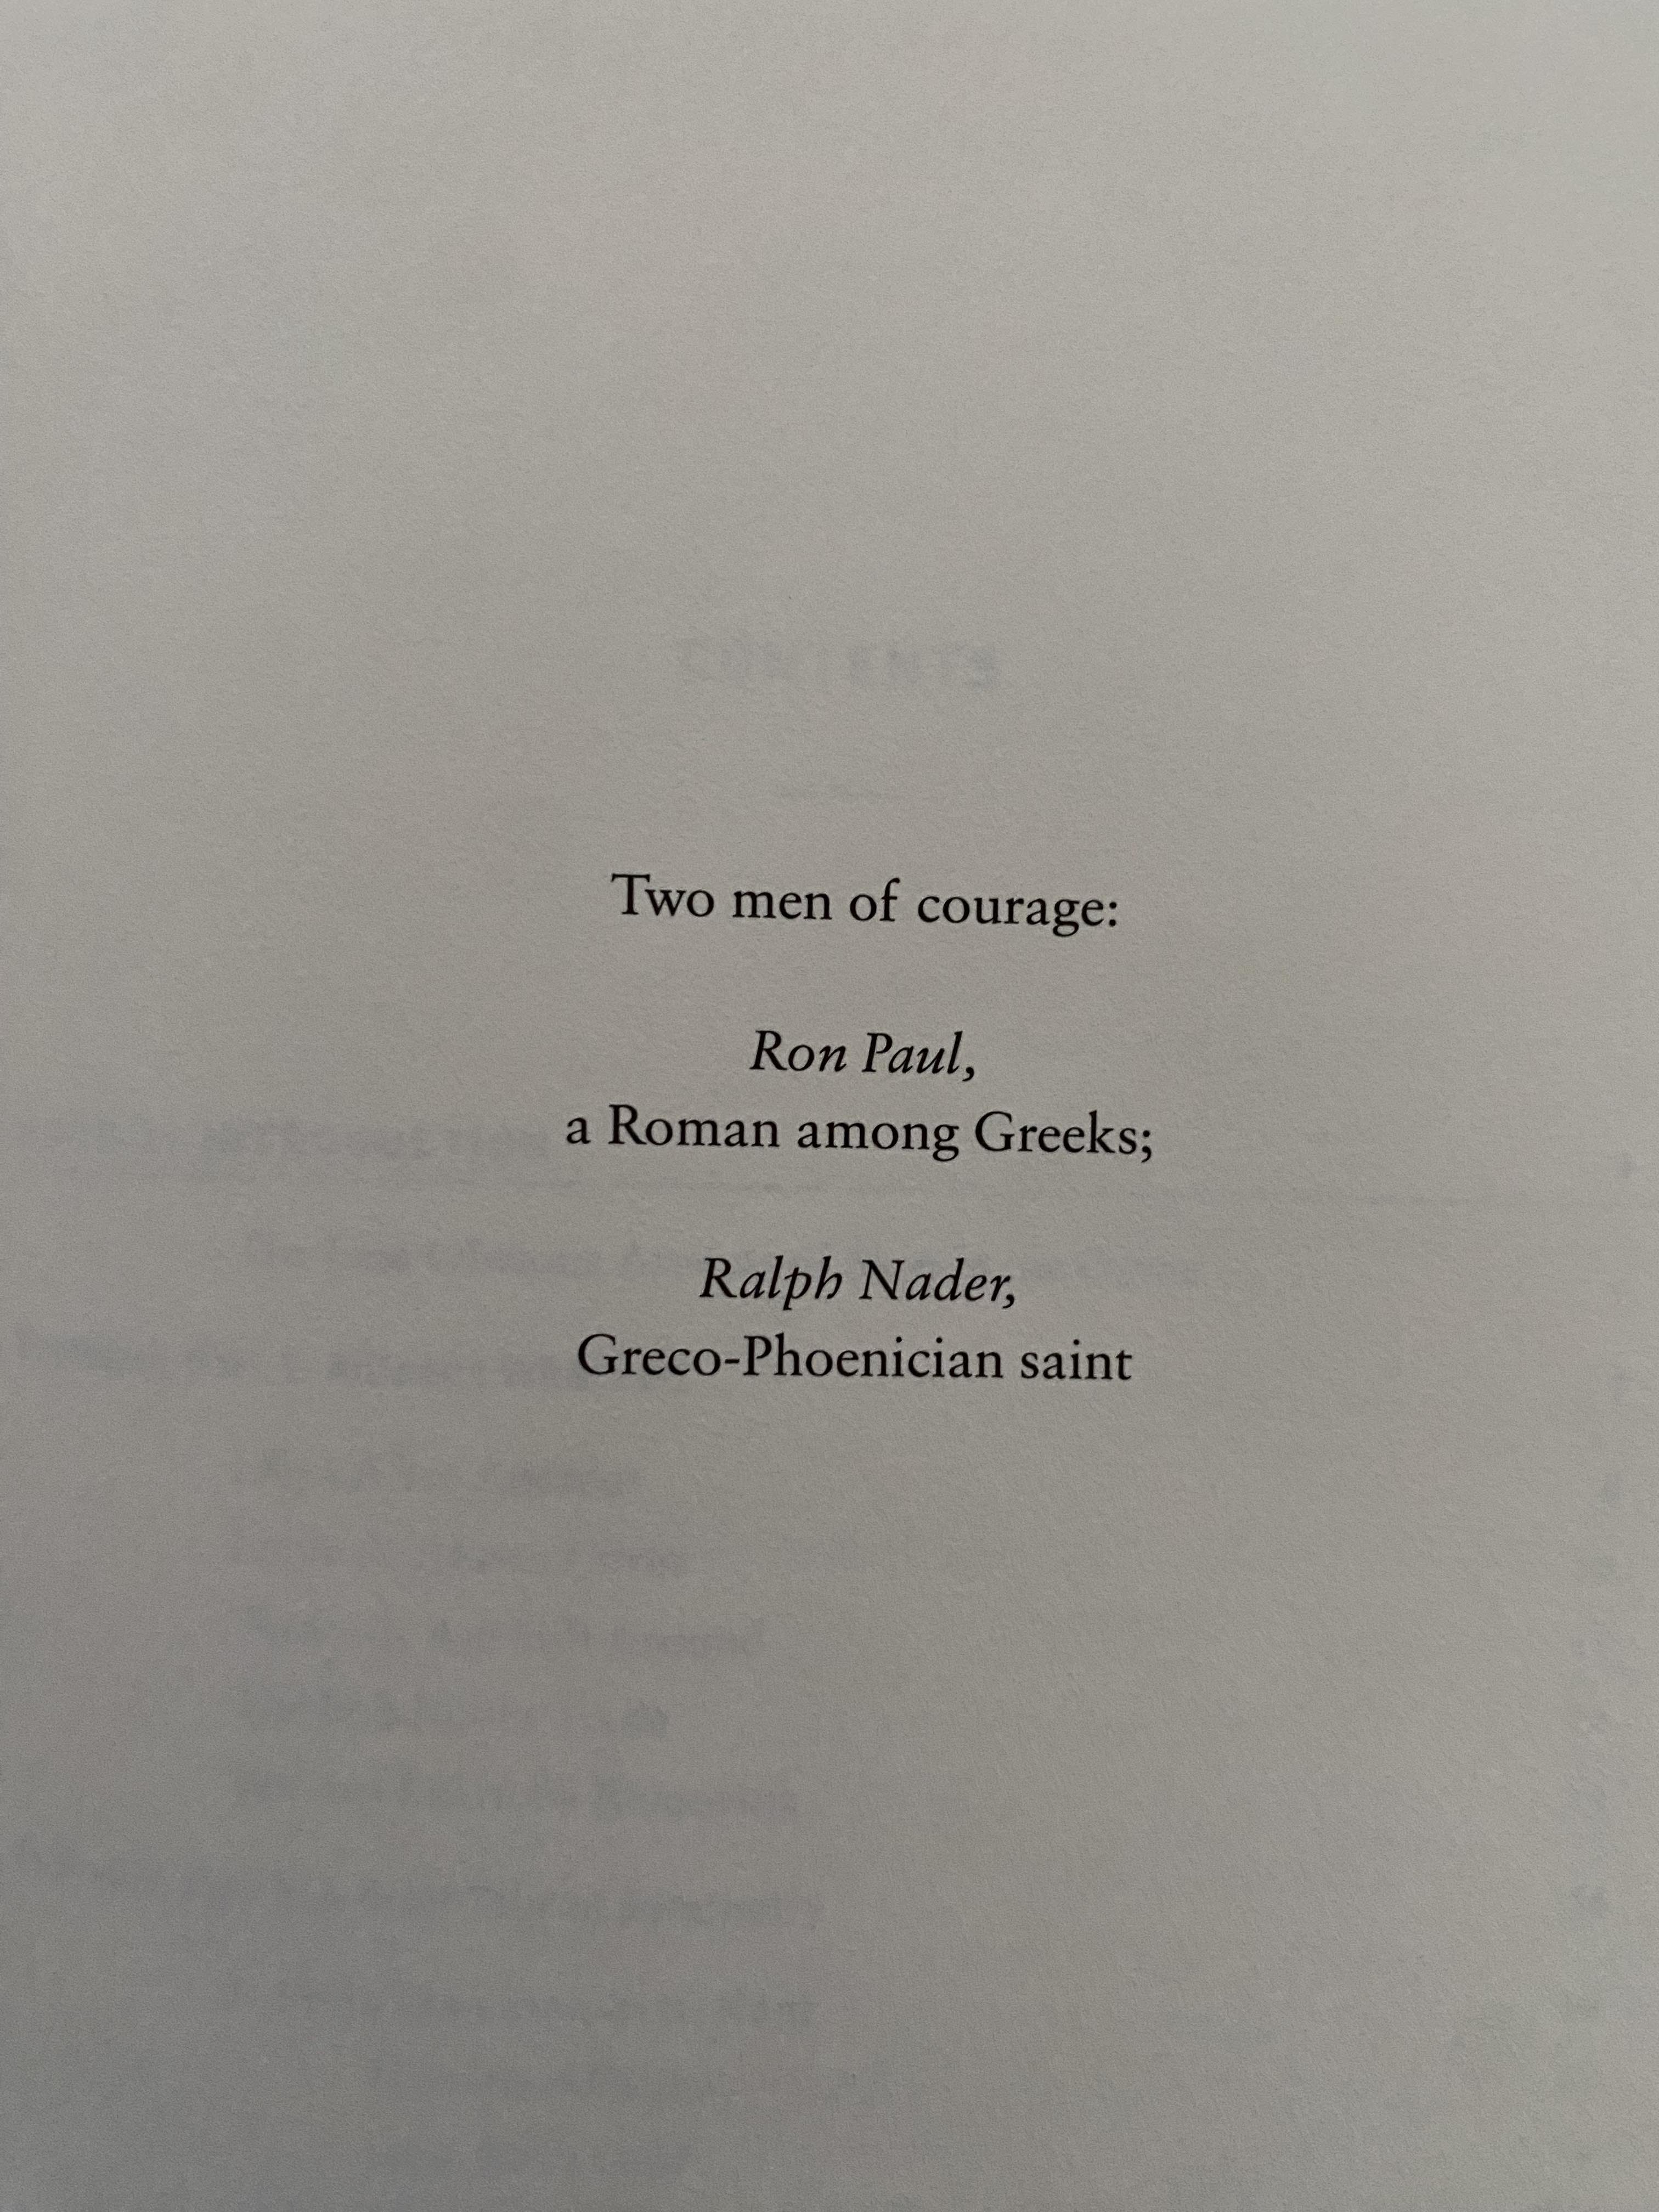 Taleb's dedication of "Skin in the Game" to Ron Paul and Ralph Nader